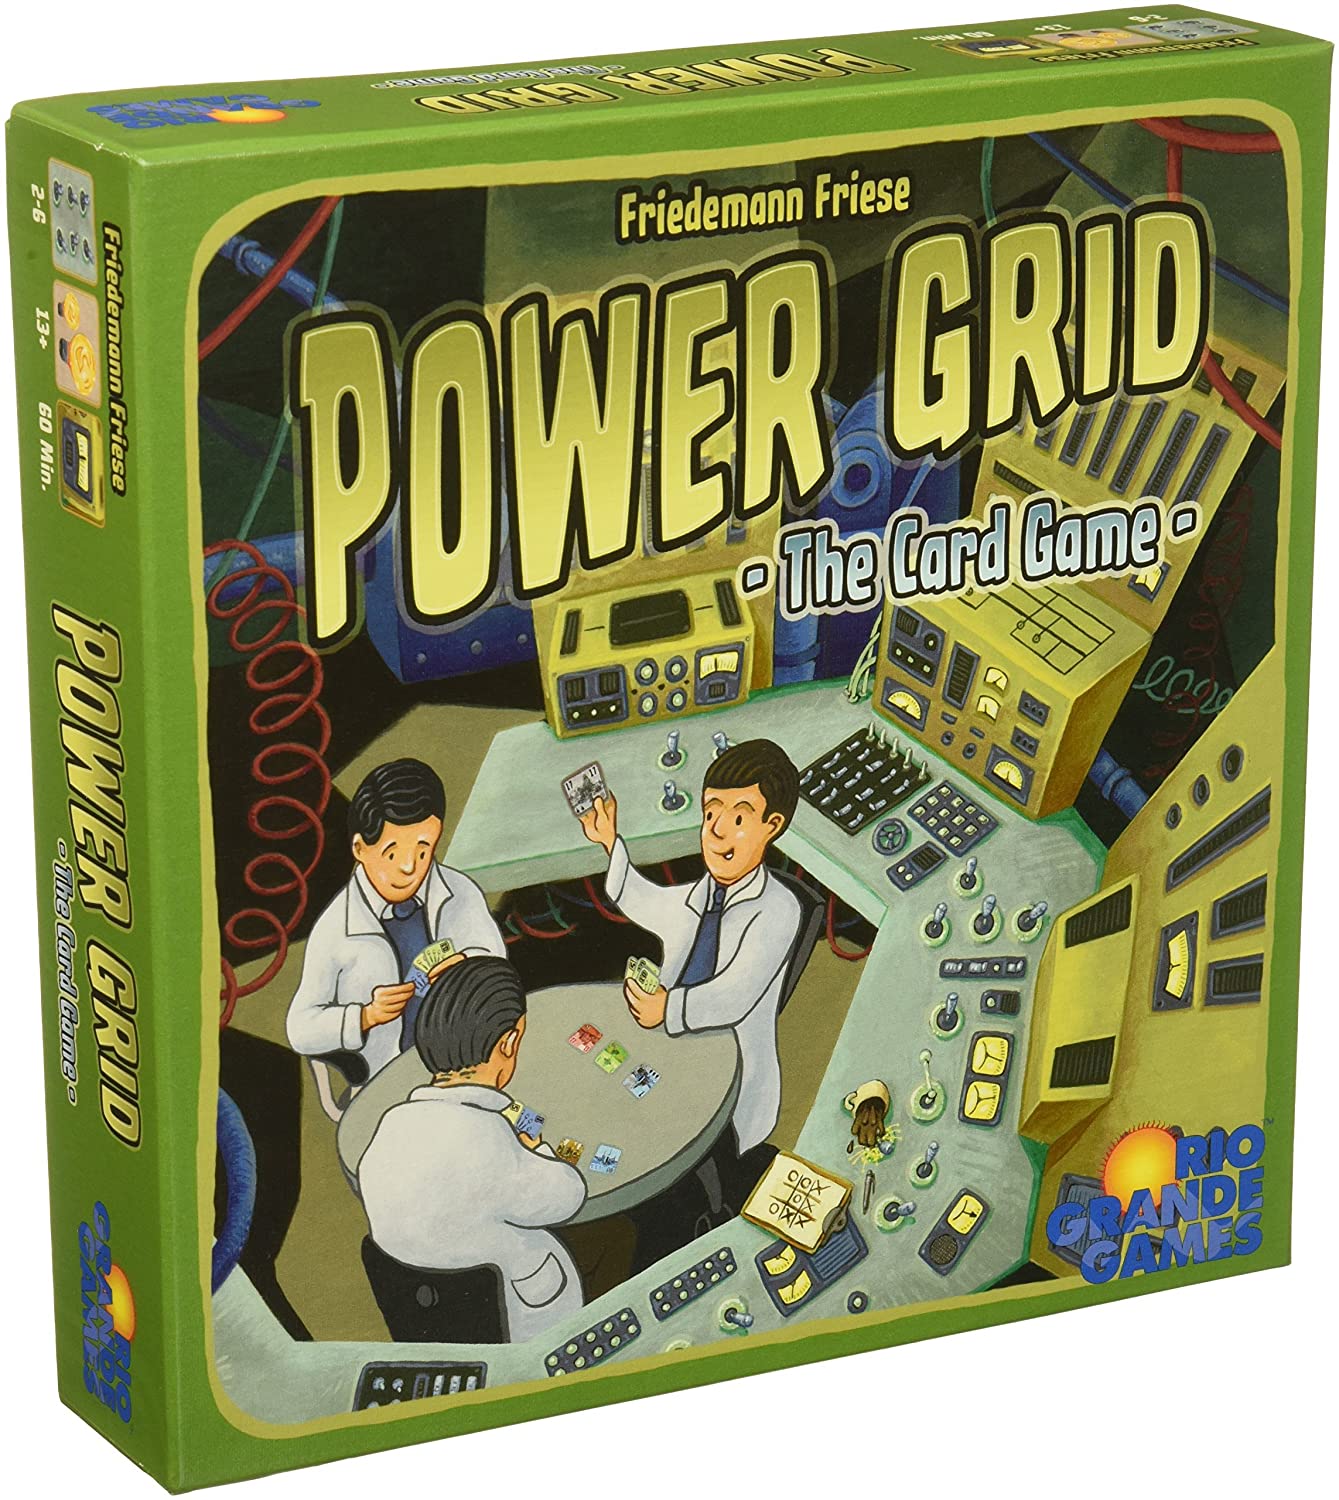 Power Grid: The Card Game